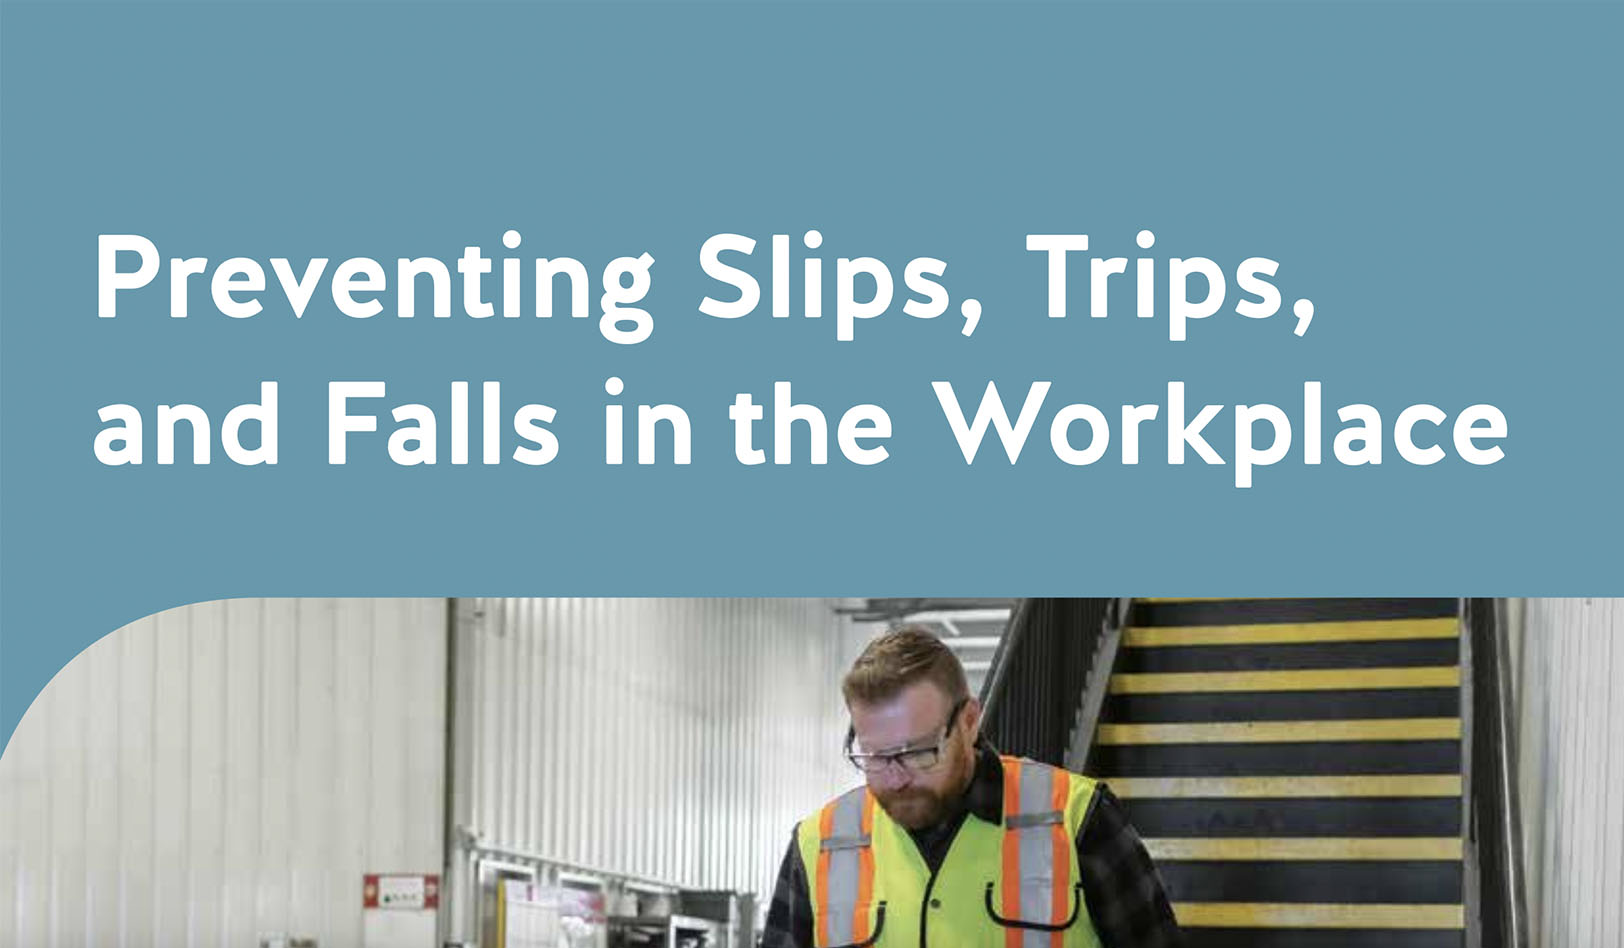 Preventing Slips, Trips, and Falls in the Workplace